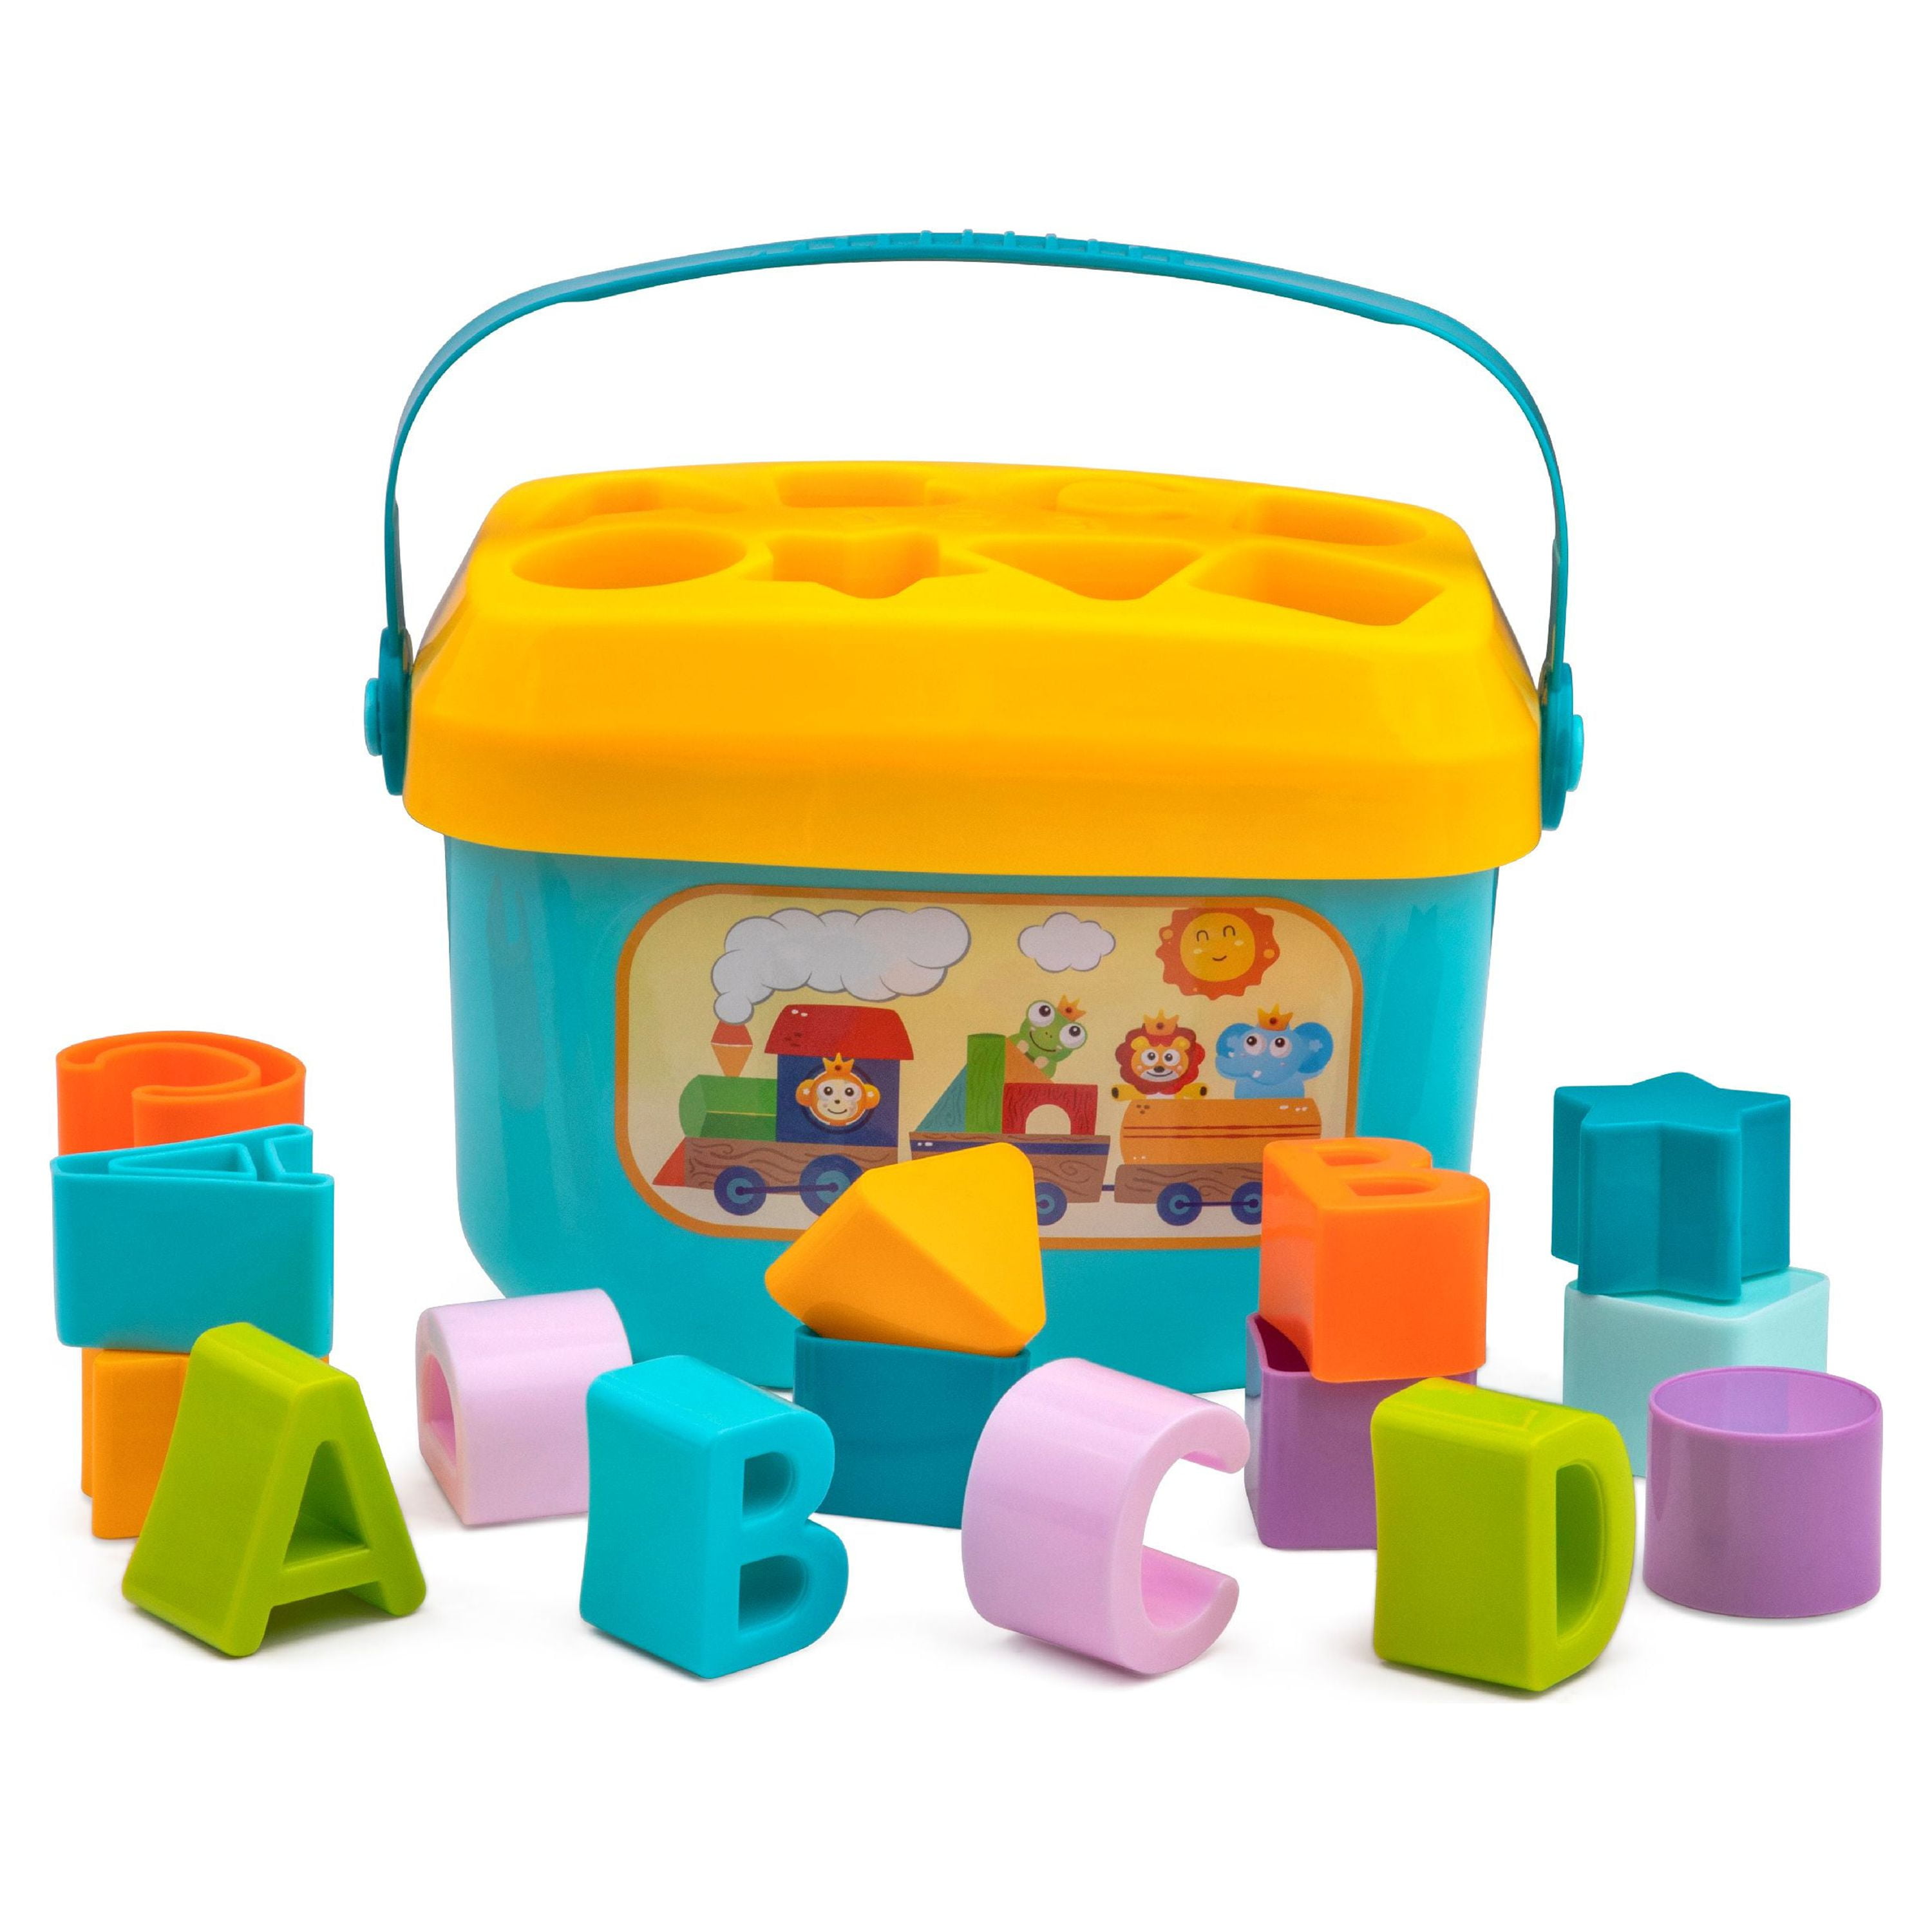 Playkidz Shape Sorter Baby and Toddler Toy, ABC and Shape Pieces, Sorting  Shape Game, Developmental Toy for Children 18 months+